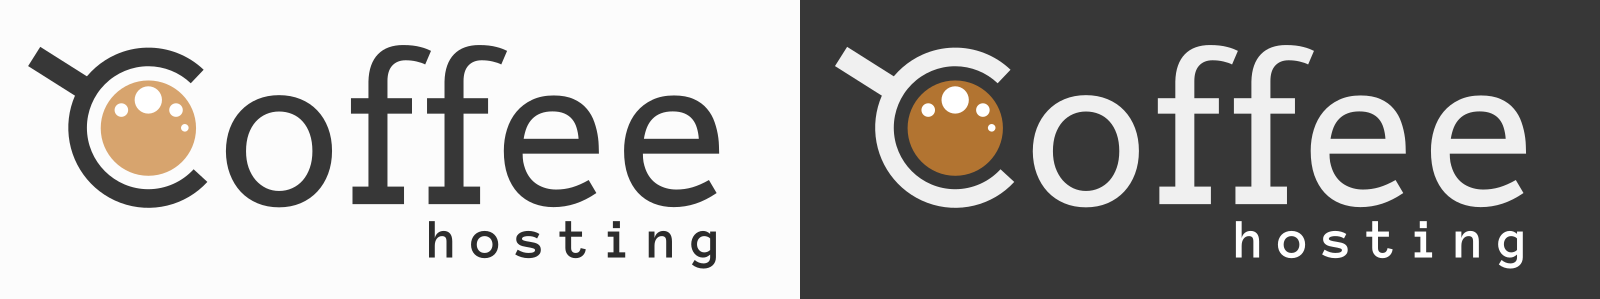 Coffee Hosting logo on light and a